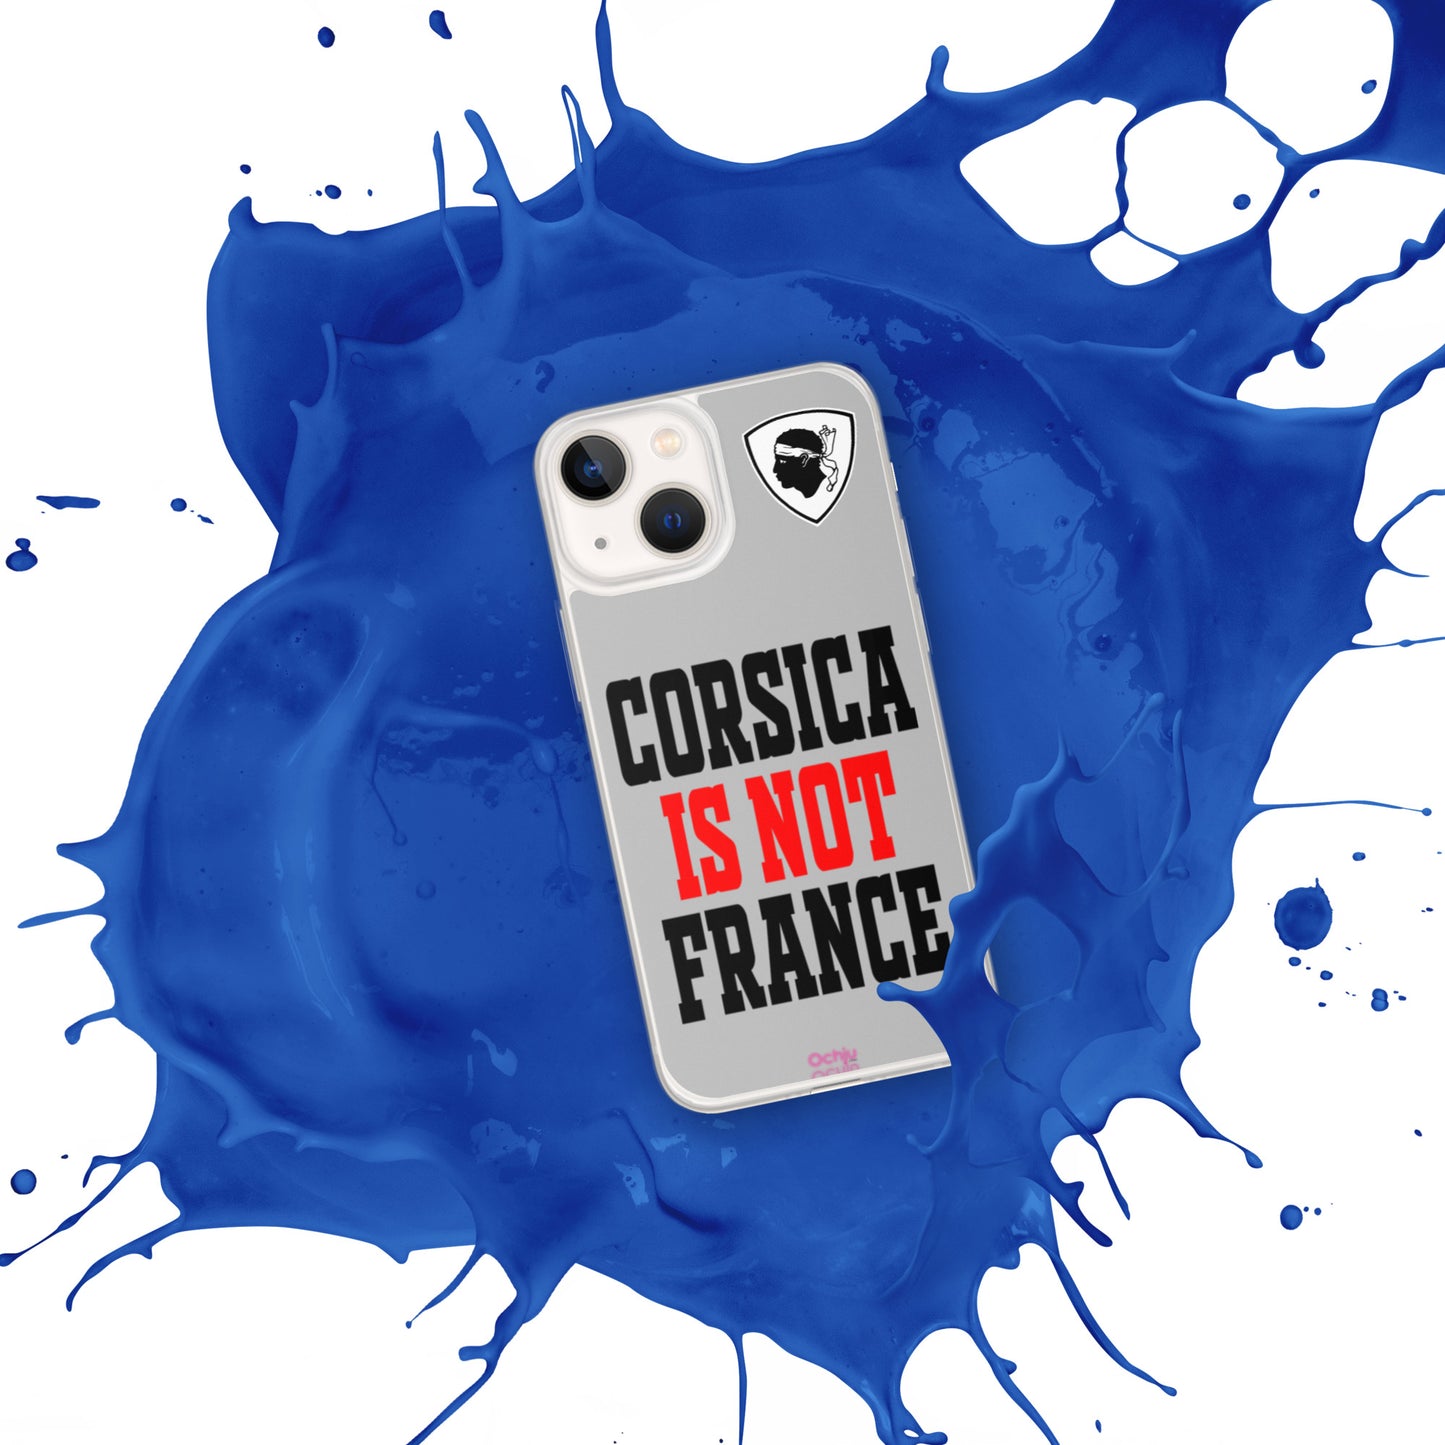 Coque pour iPhone Corsica is not France - Ochju Ochju iPhone 13 mini Ochju Coque pour iPhone Corsica is not France